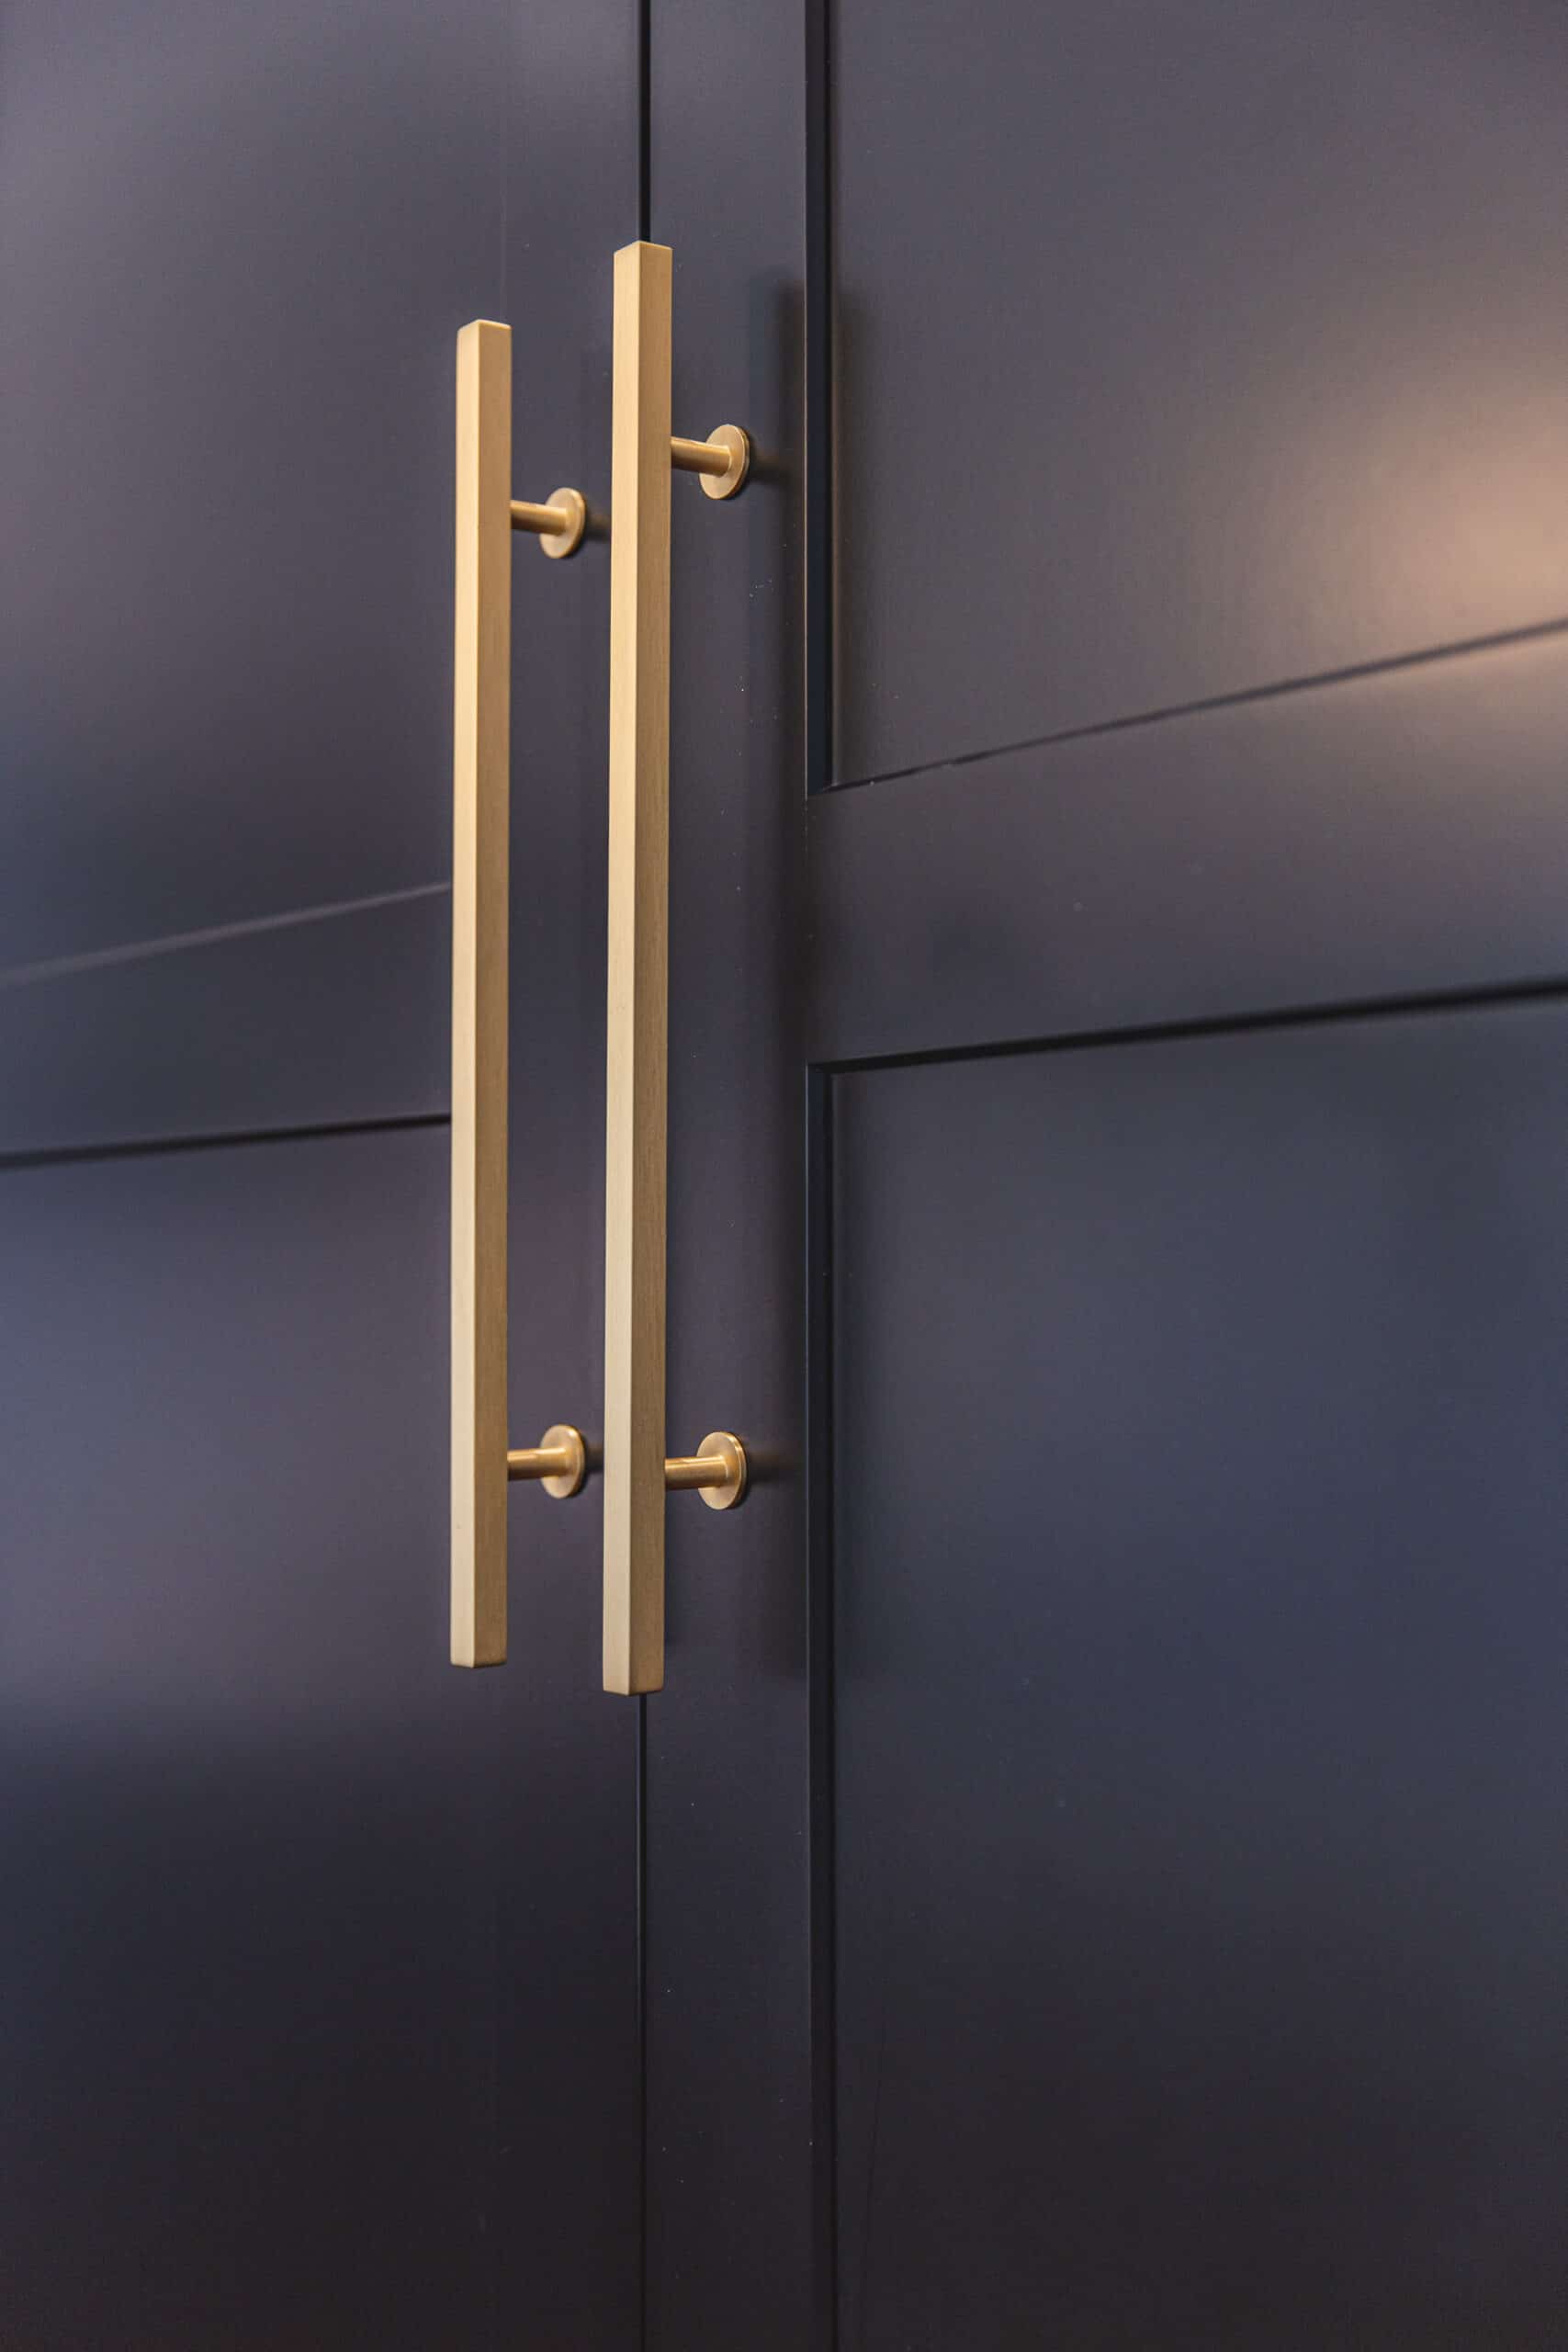 A close-up of a black cabinet with brass handles